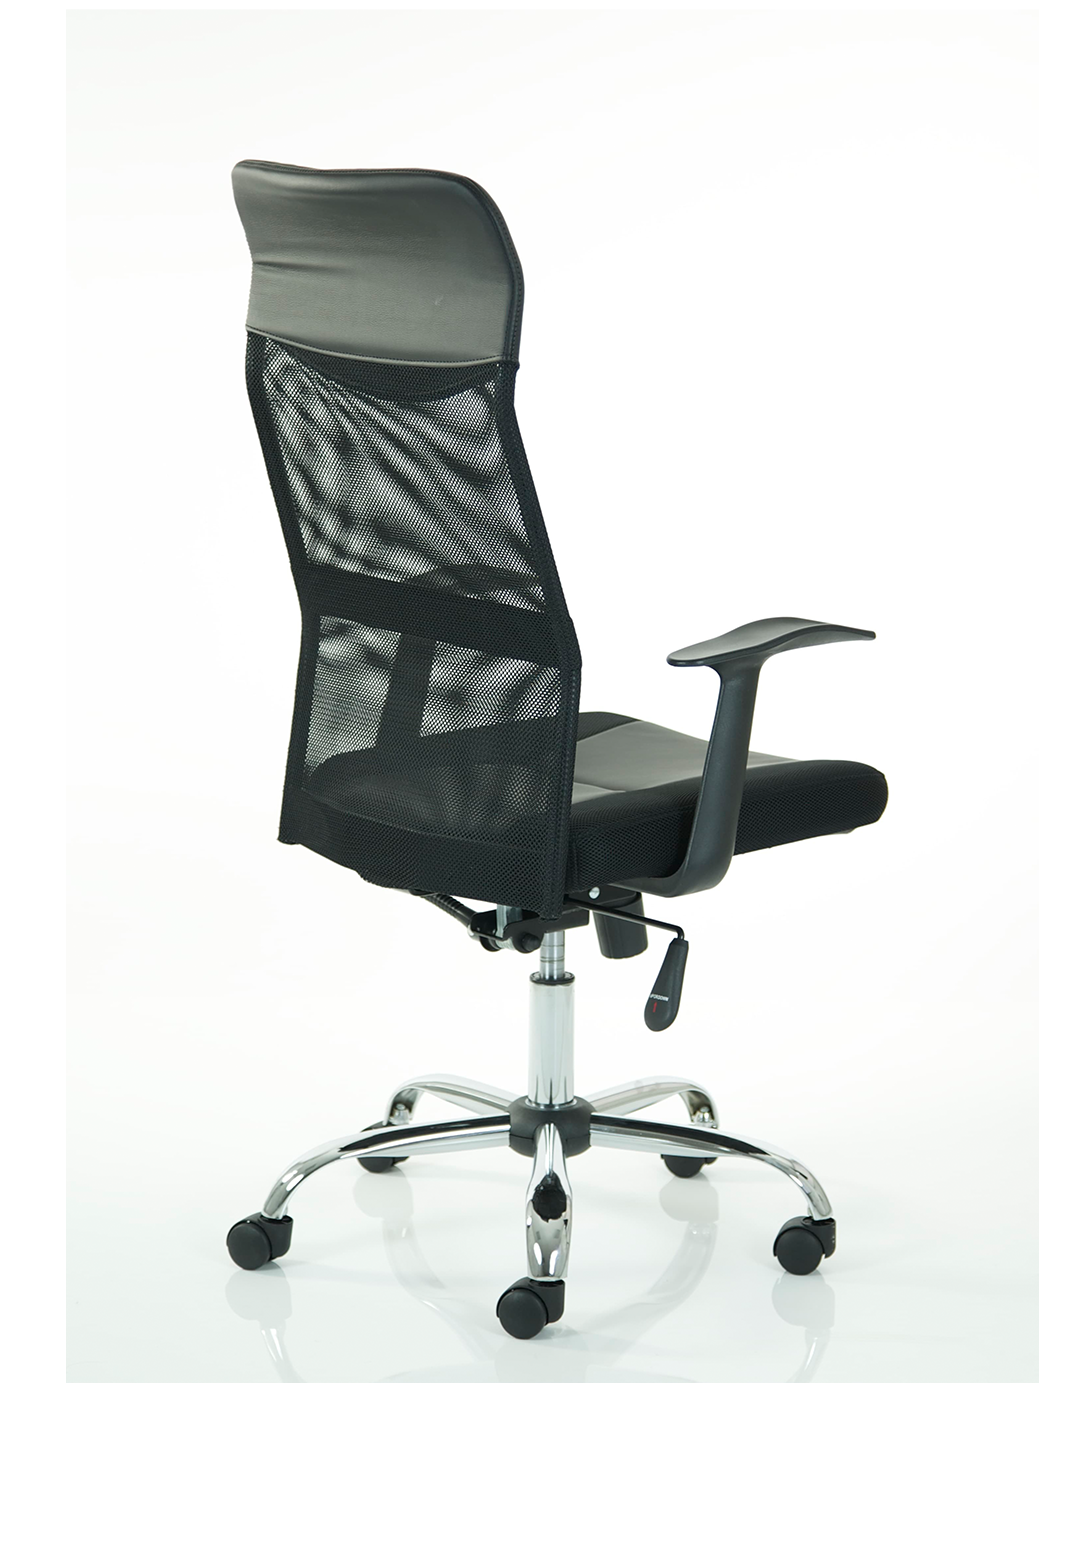 Vegalite Exec Home Office Chair | Executive Chair | Home Office Furniture | Leather and Mesh Chair | Chrome detail | Swivel Chair | Swivel Chair with mesh